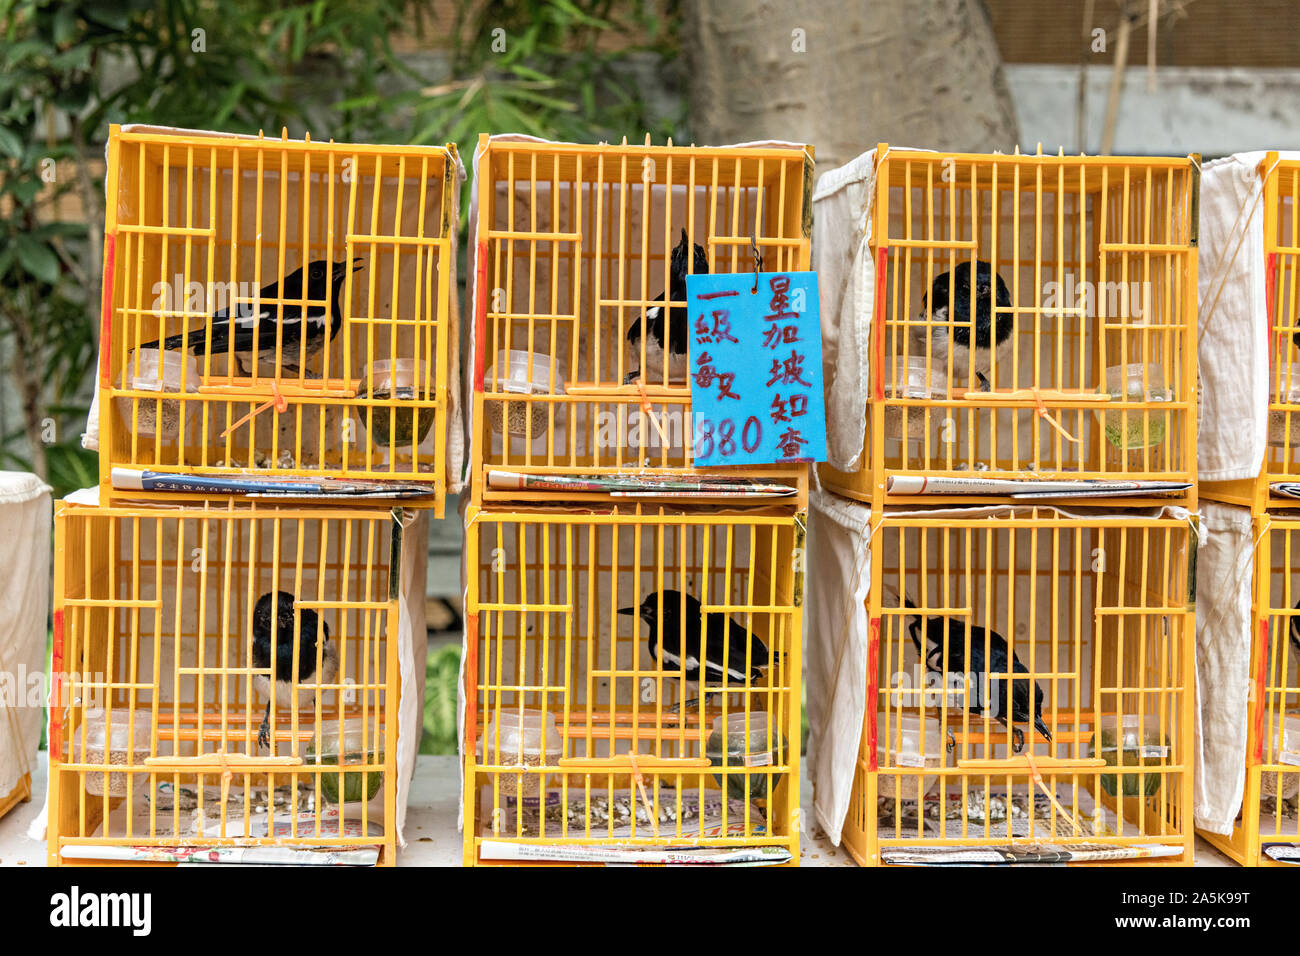 Chinese songbirds in traditional bamboo cages on sale at the Yuen Po Street Bird Garden in Mong Kok, Kowloon, Hong Kong. Stock Photo